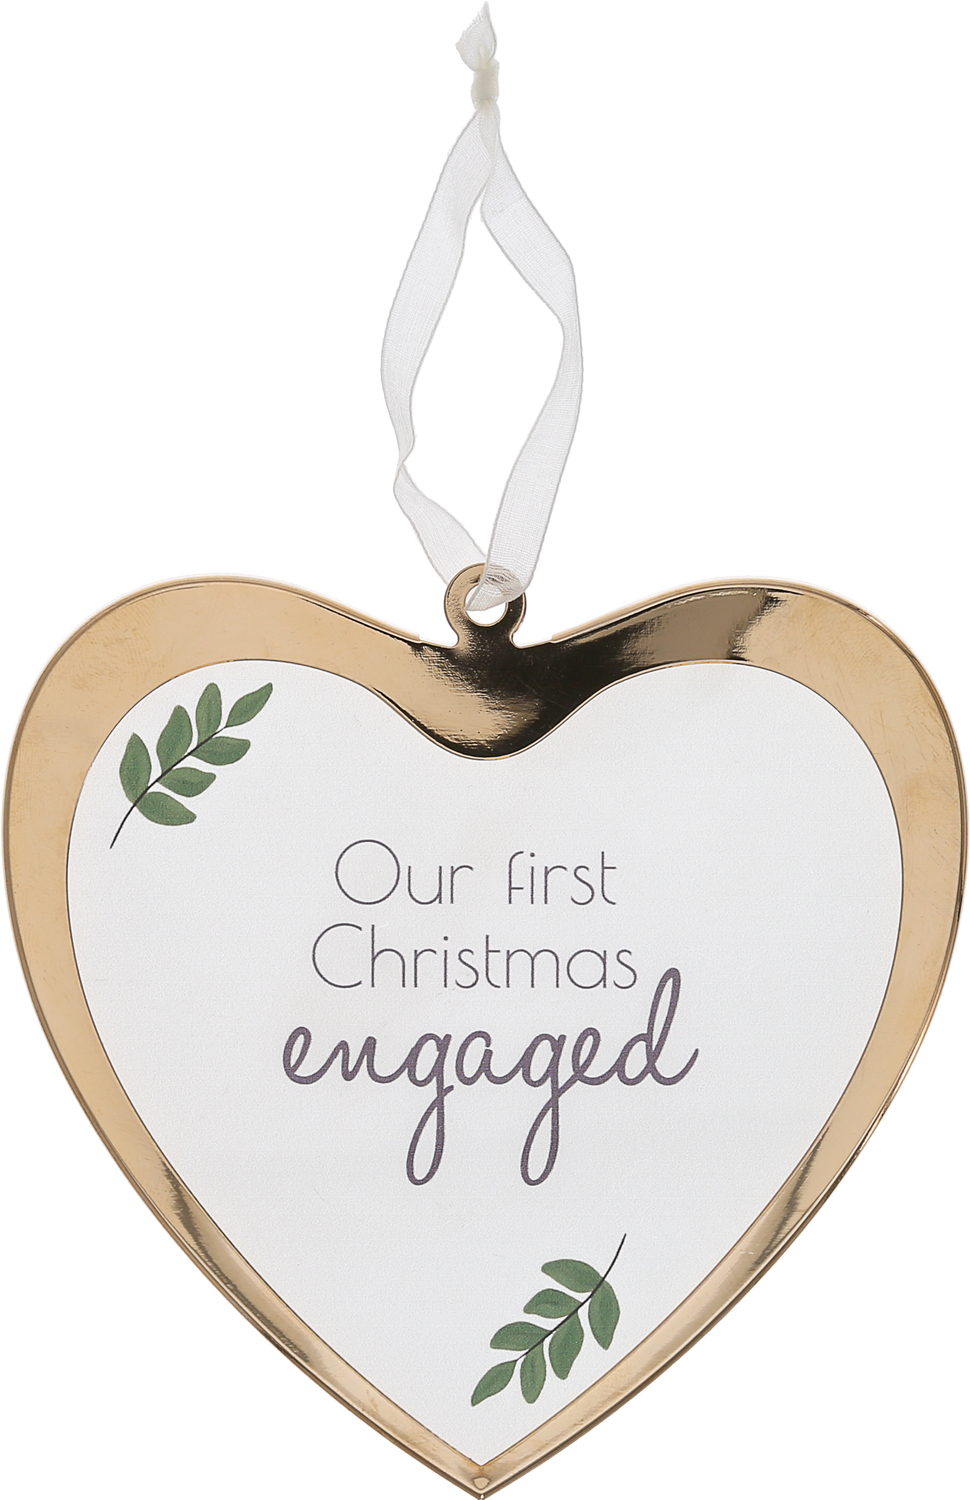 First Christmas Engaged by Love Grows - First Christmas Engaged - 4.75" Glass Ornament